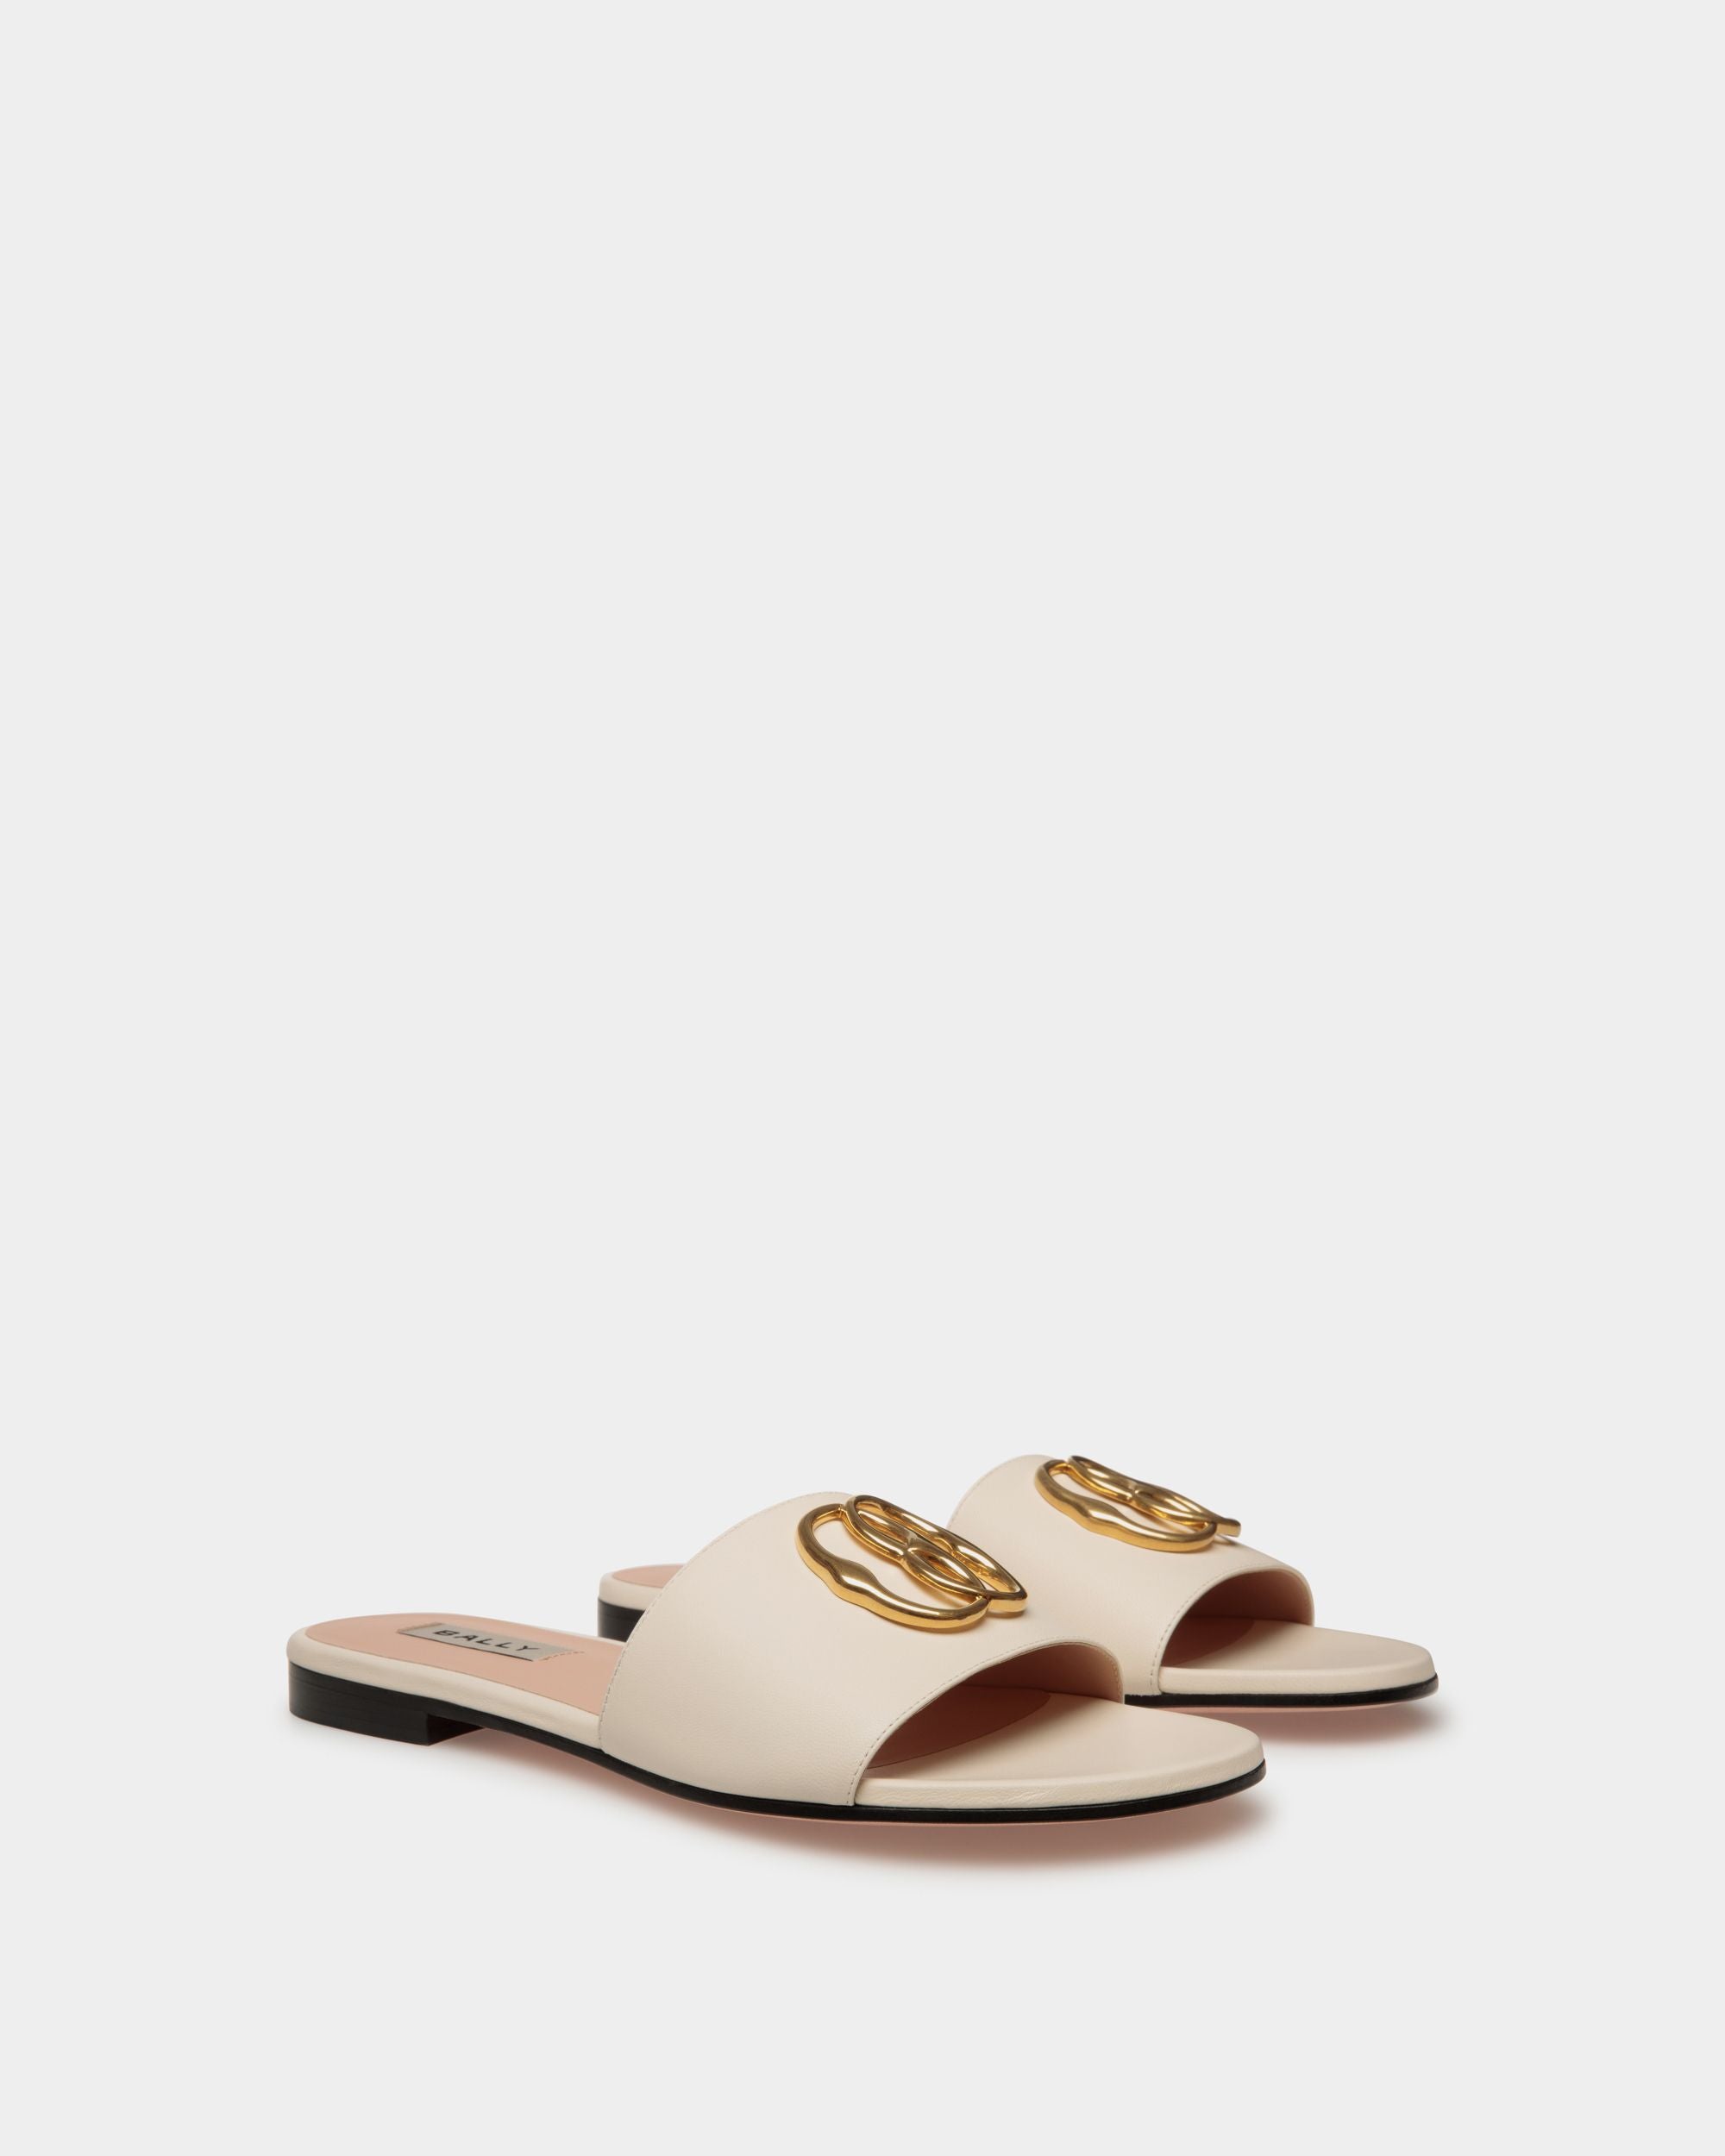 Emblem | Women's Flat Slide in White Nappa Leather | Bally | Still Life 3/4 Front